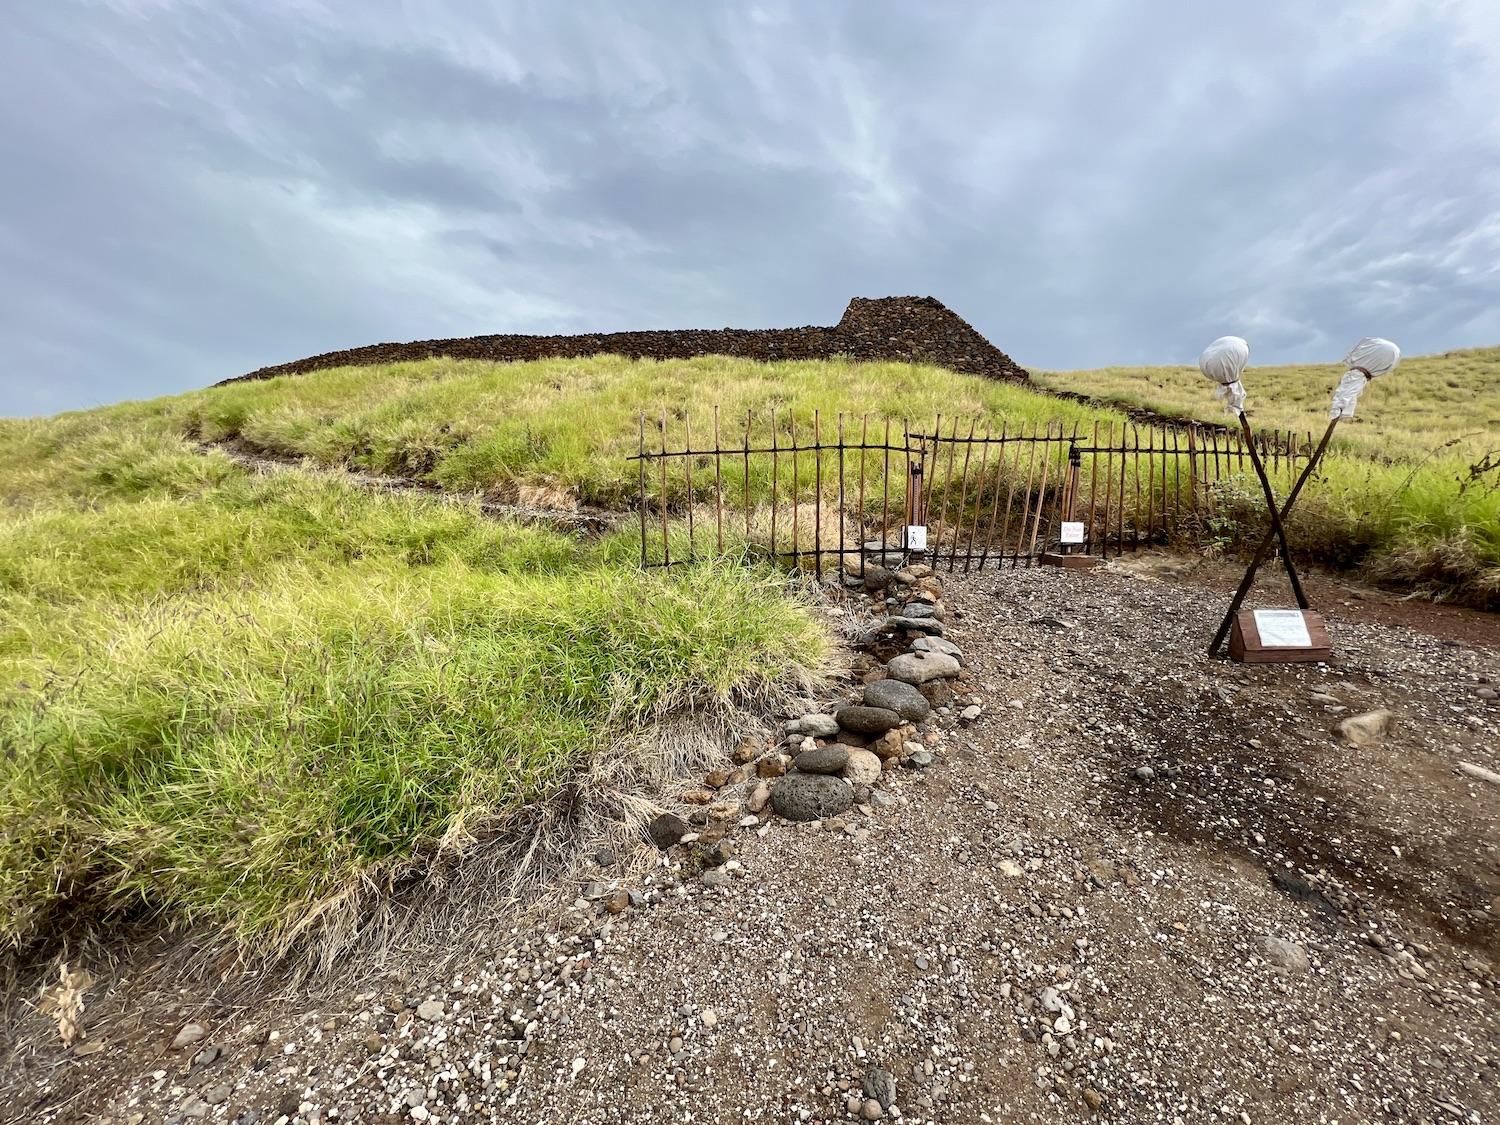 This is as close as you can get to the Puʻukoholā Heiau (temple).